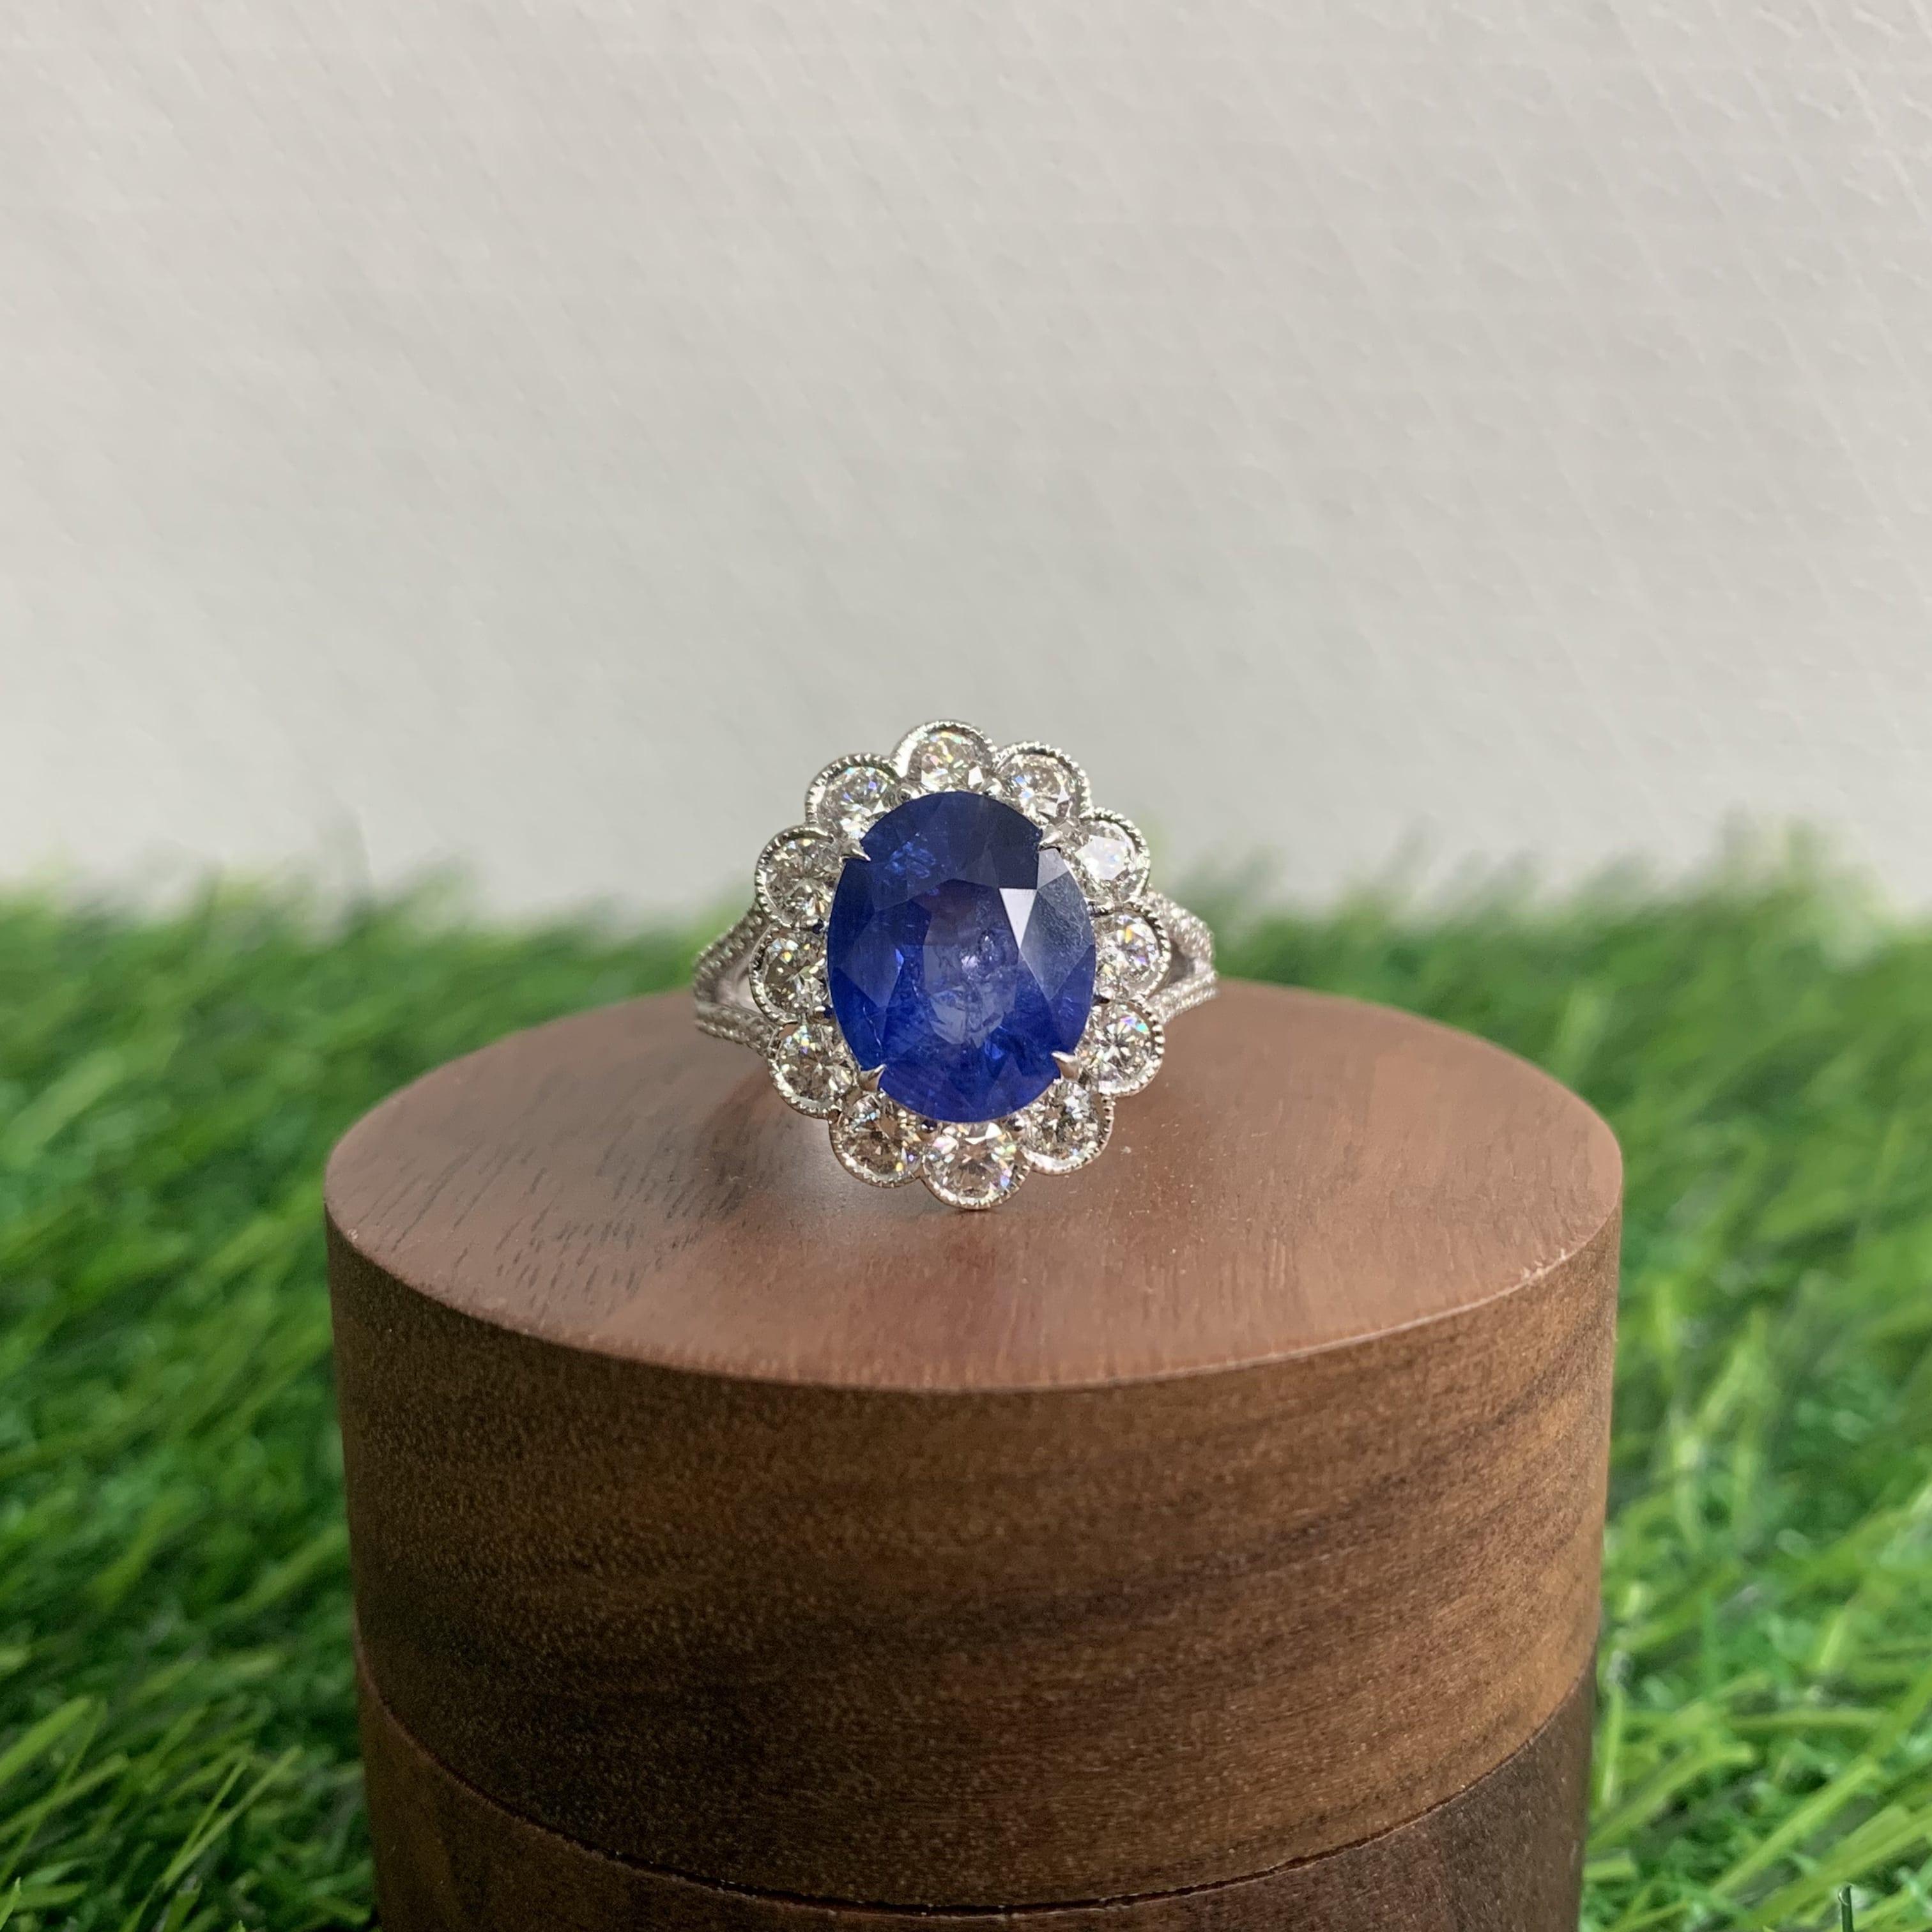 Radiating timeless elegance, this extraordinary piece has been specially designed to accentuate the mesmerizing beauty of this royal blue sapphire.

The sapphire, a regal emblem of rich sophistication, boasts a captivating royal blue hue and a total